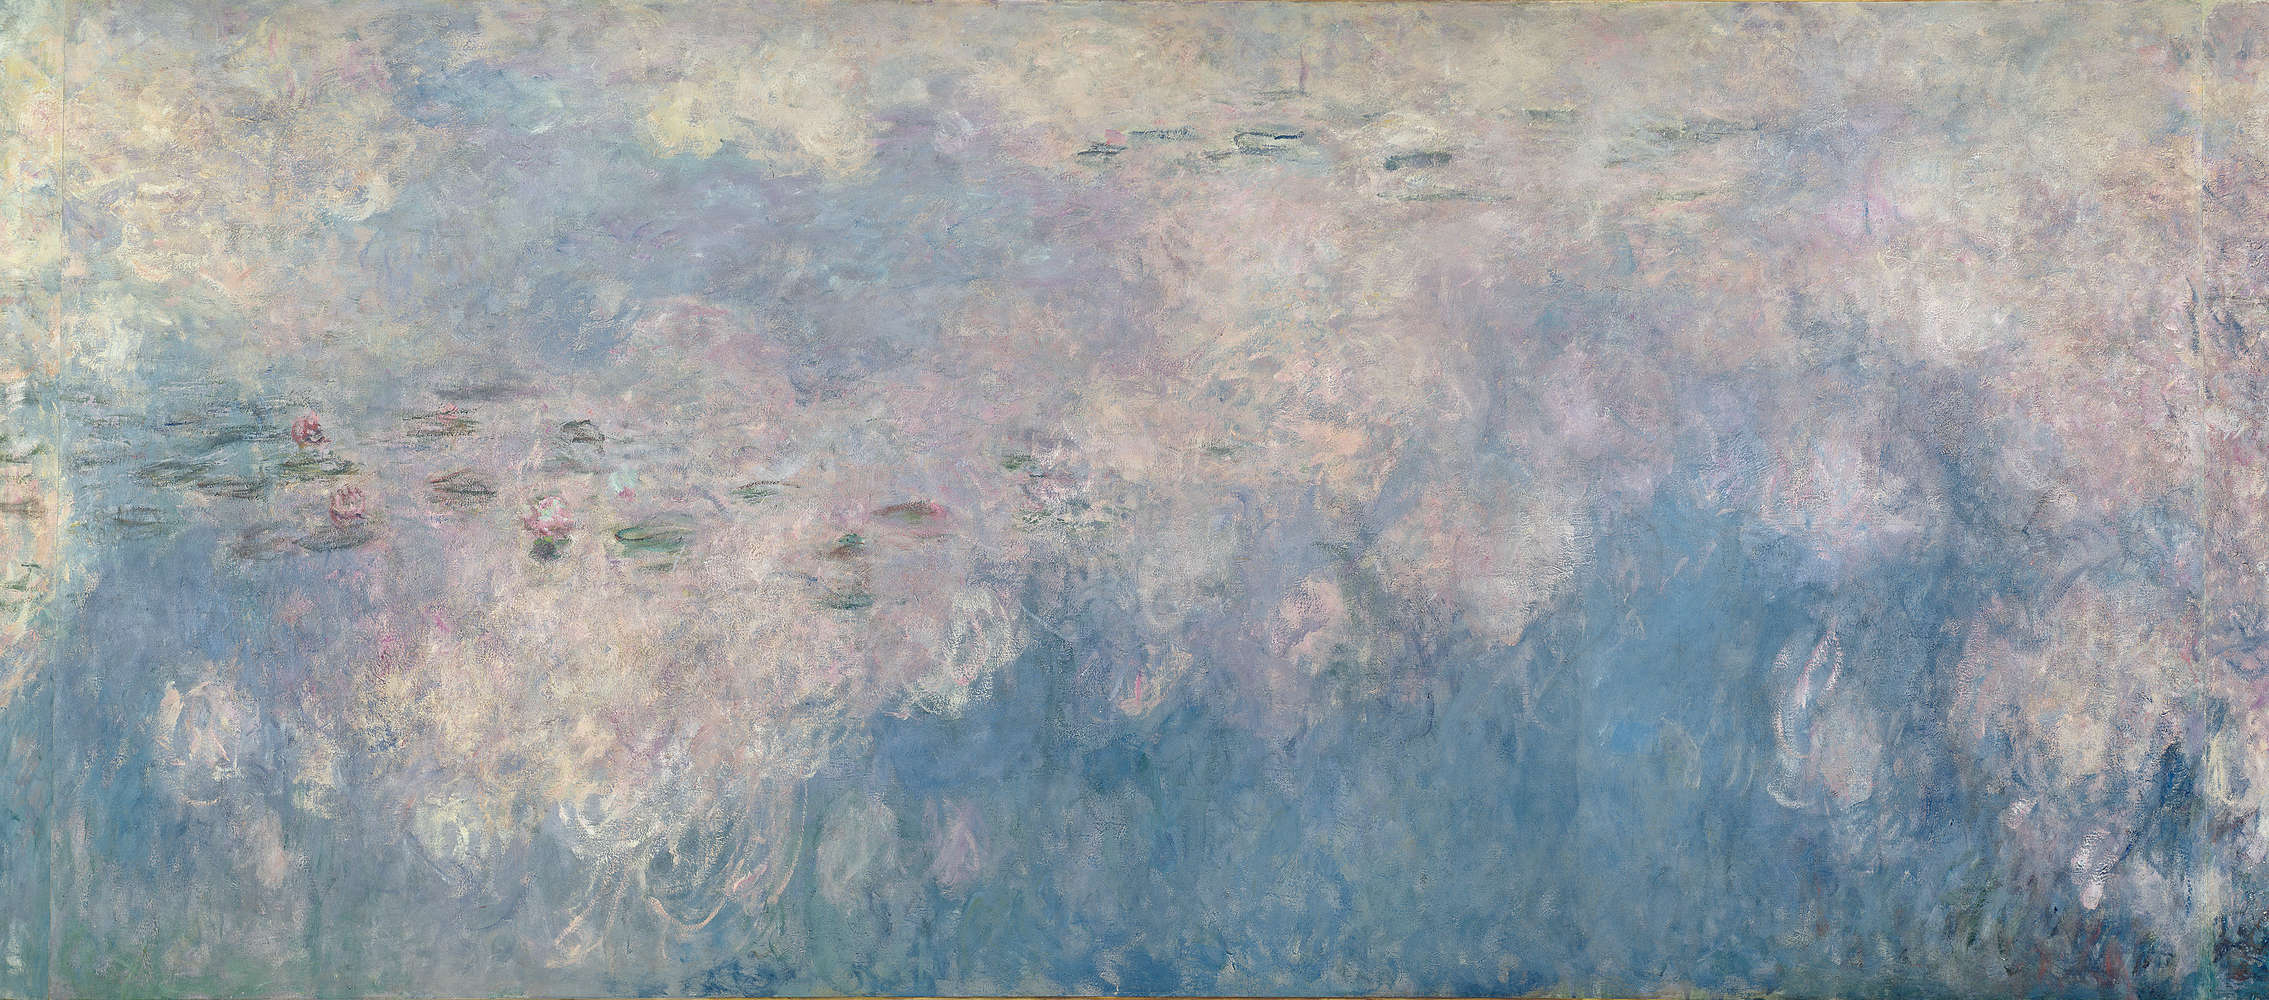             Water Lilies The Clouds mural by Claude Monet
        